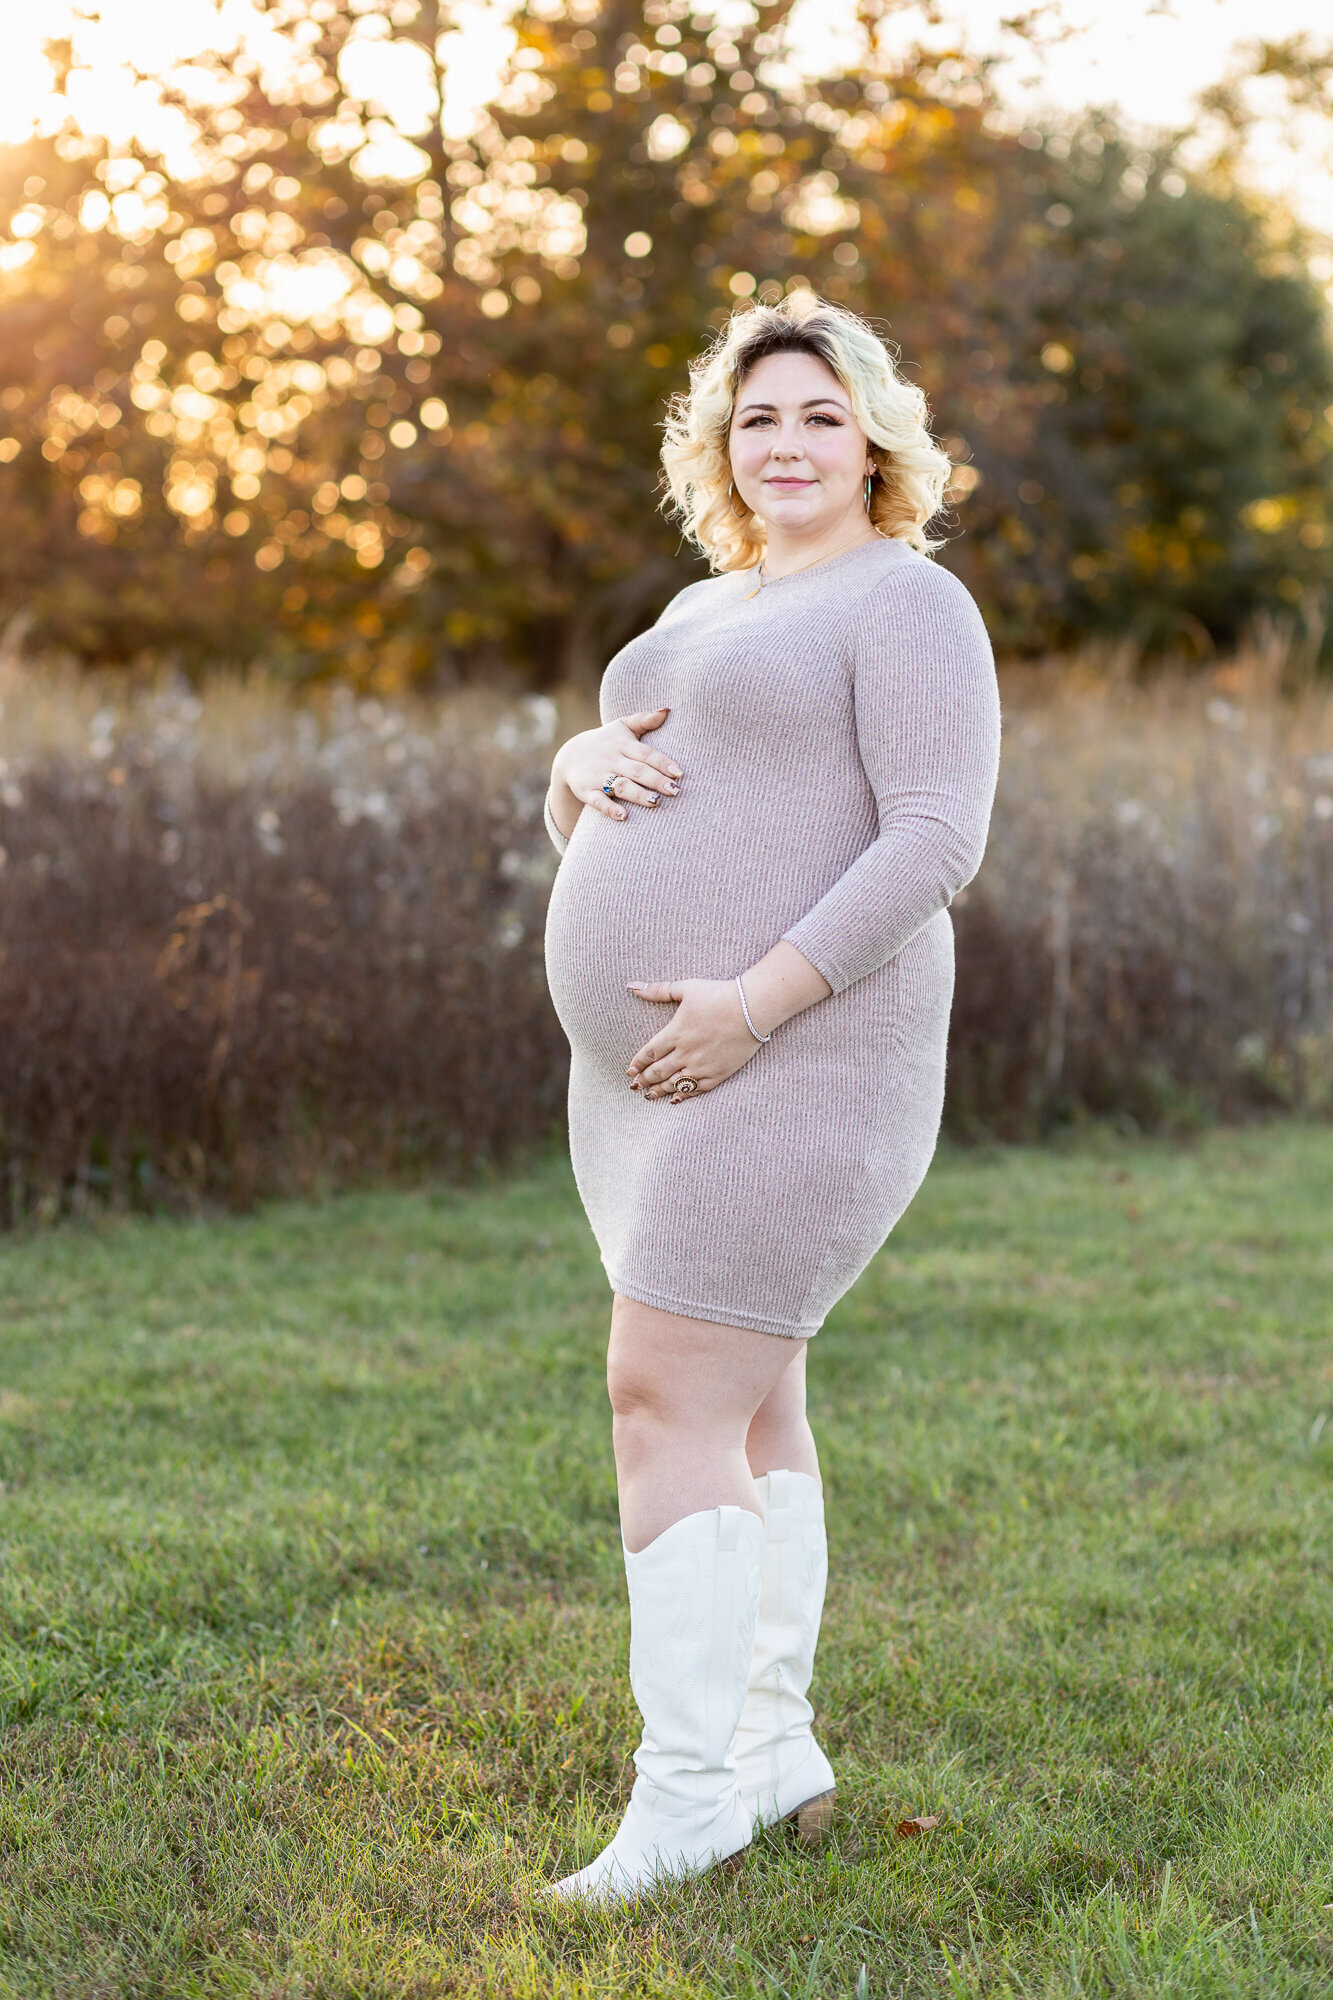 Maternity-outdoor-photography-session-golden-hour-Frankfort-Kentucky-photographer-3